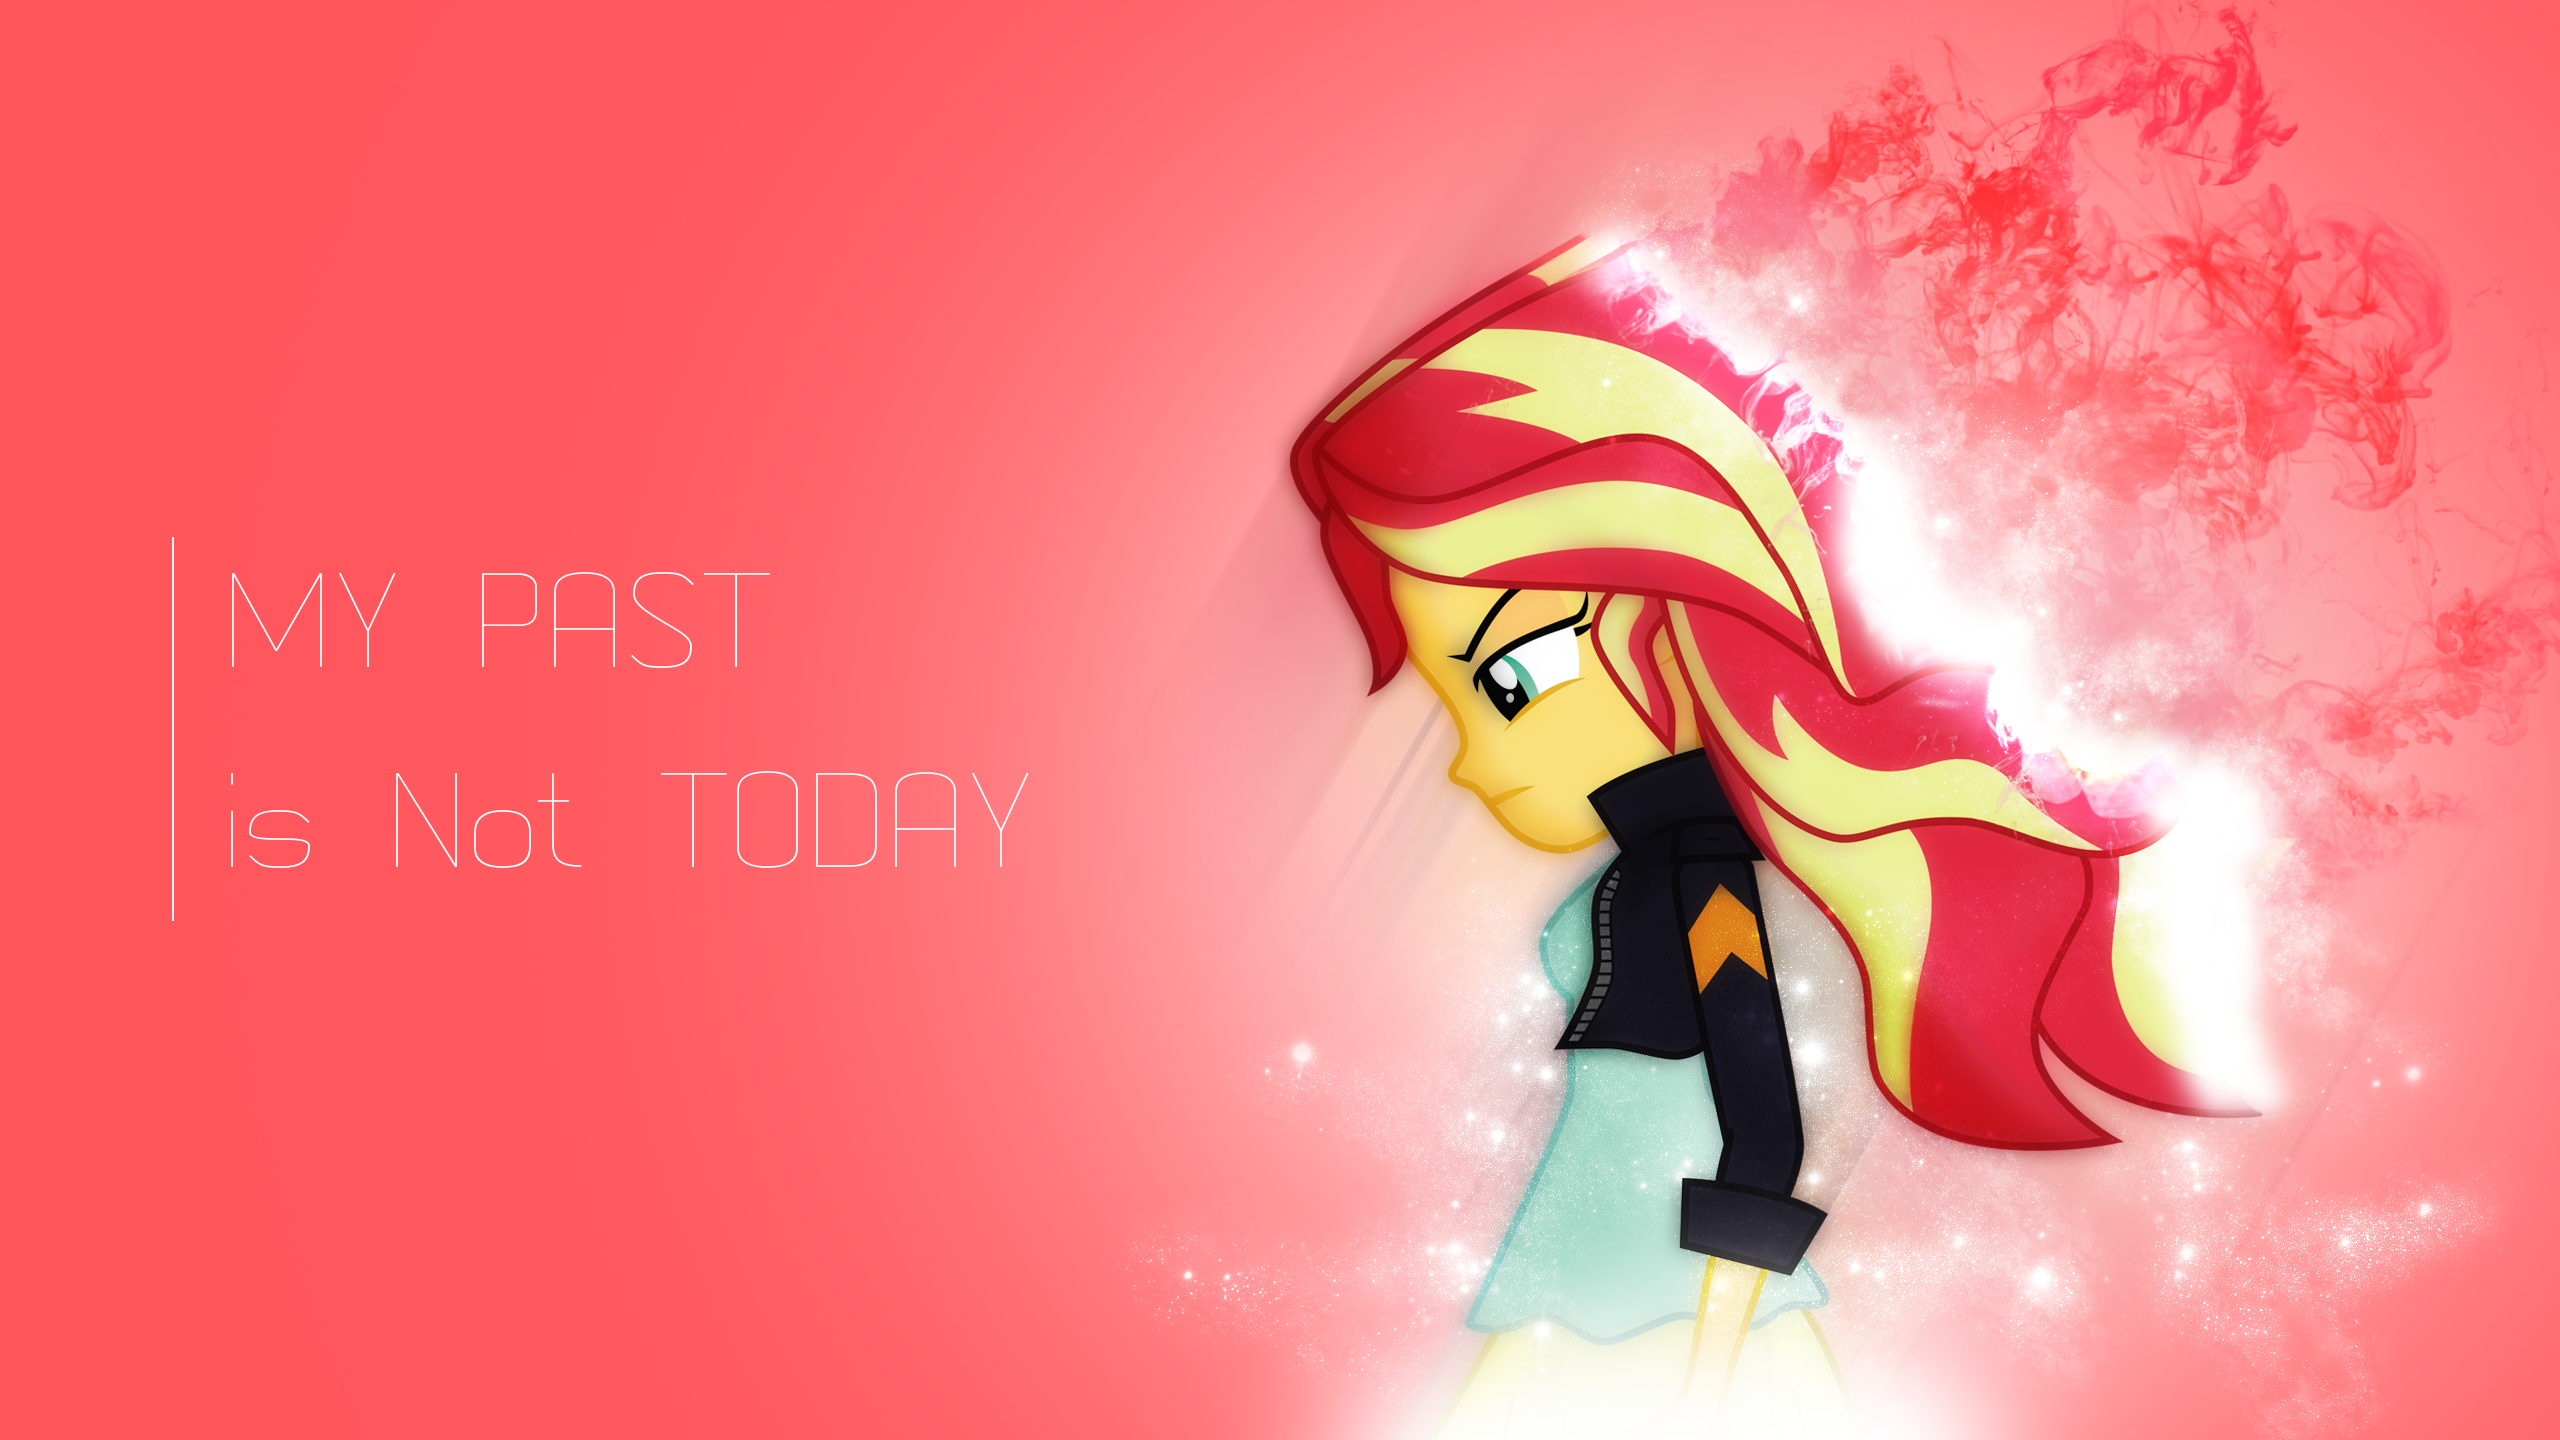 My Past is not Today . 2560 x 1440 HD Wallpaper